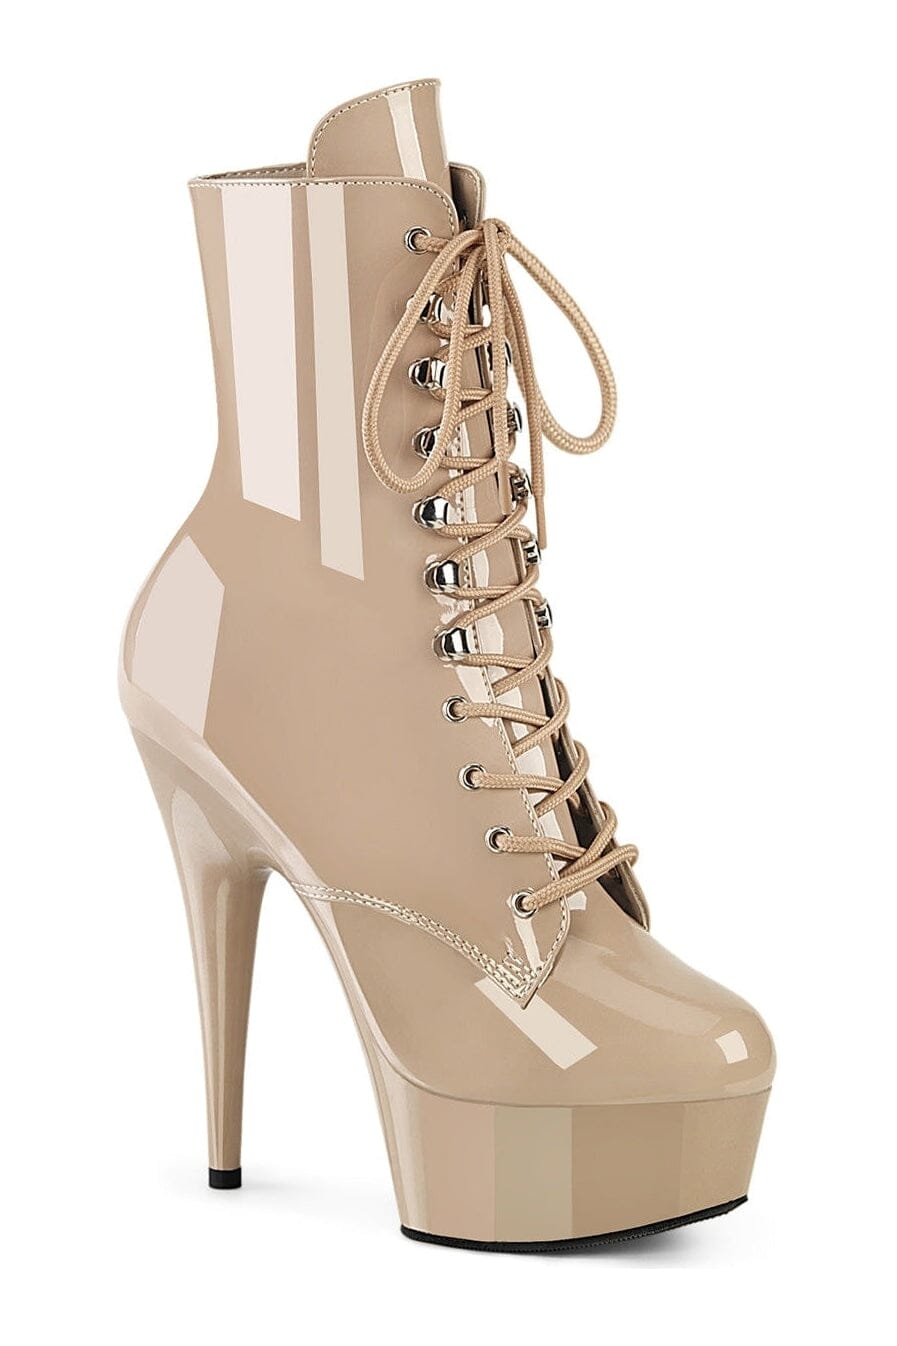 DELIGHT-1020 Nude Patent Ankle Boot-Ankle Boots-Pleaser-Nude-10-Patent-SEXYSHOES.COM